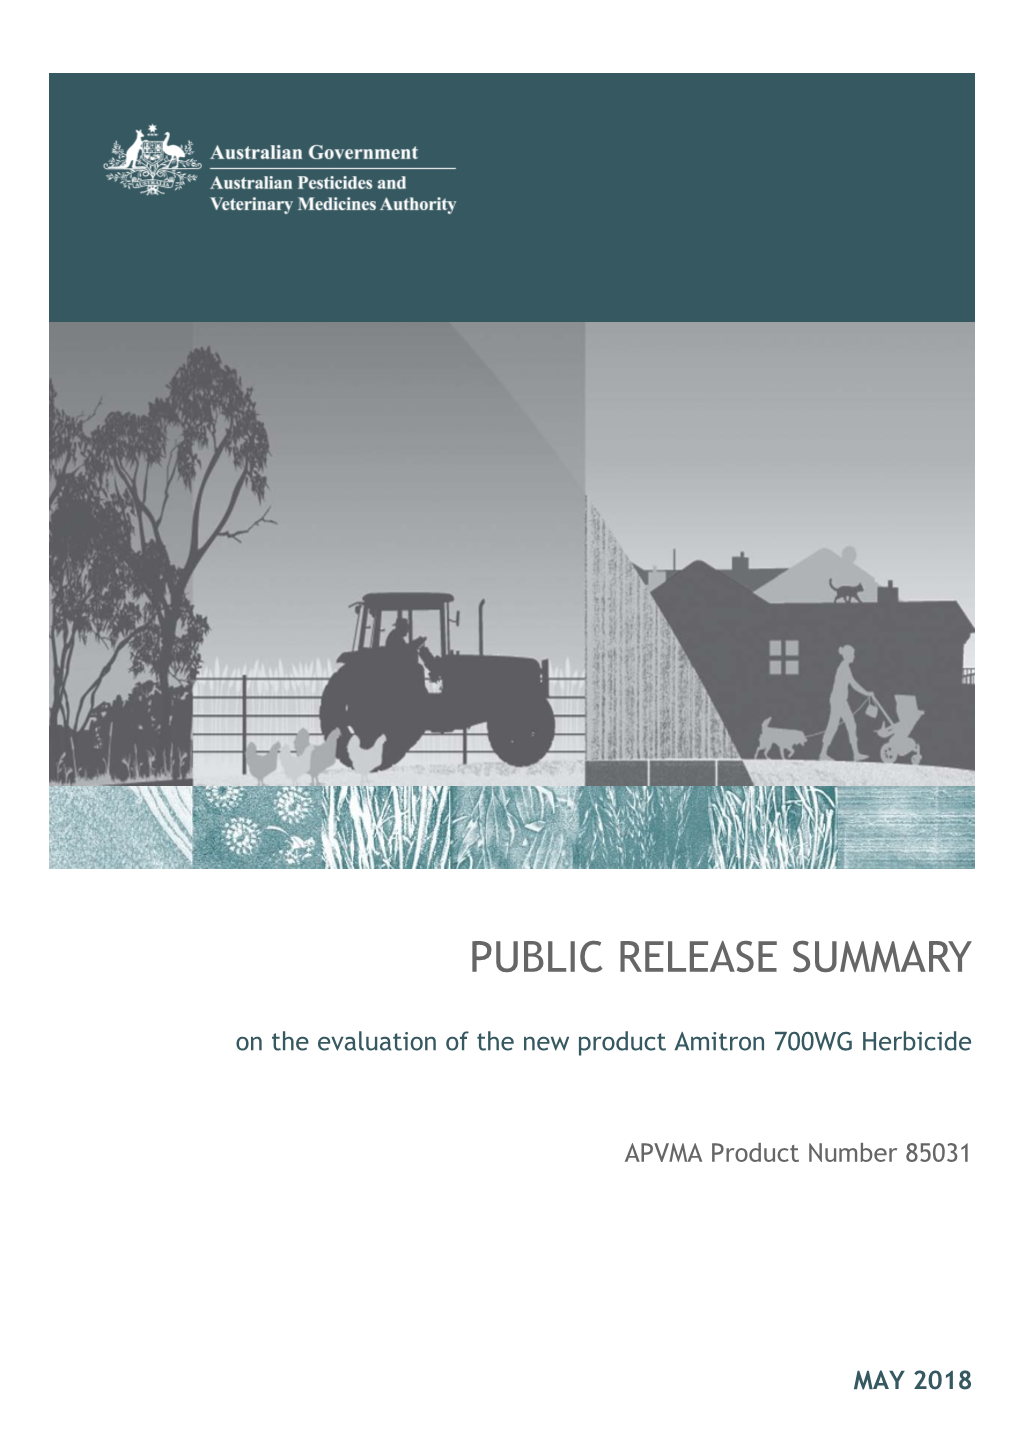 Public Release Summary on the Evaluation of the New Product Amitron 700WG Herbicide